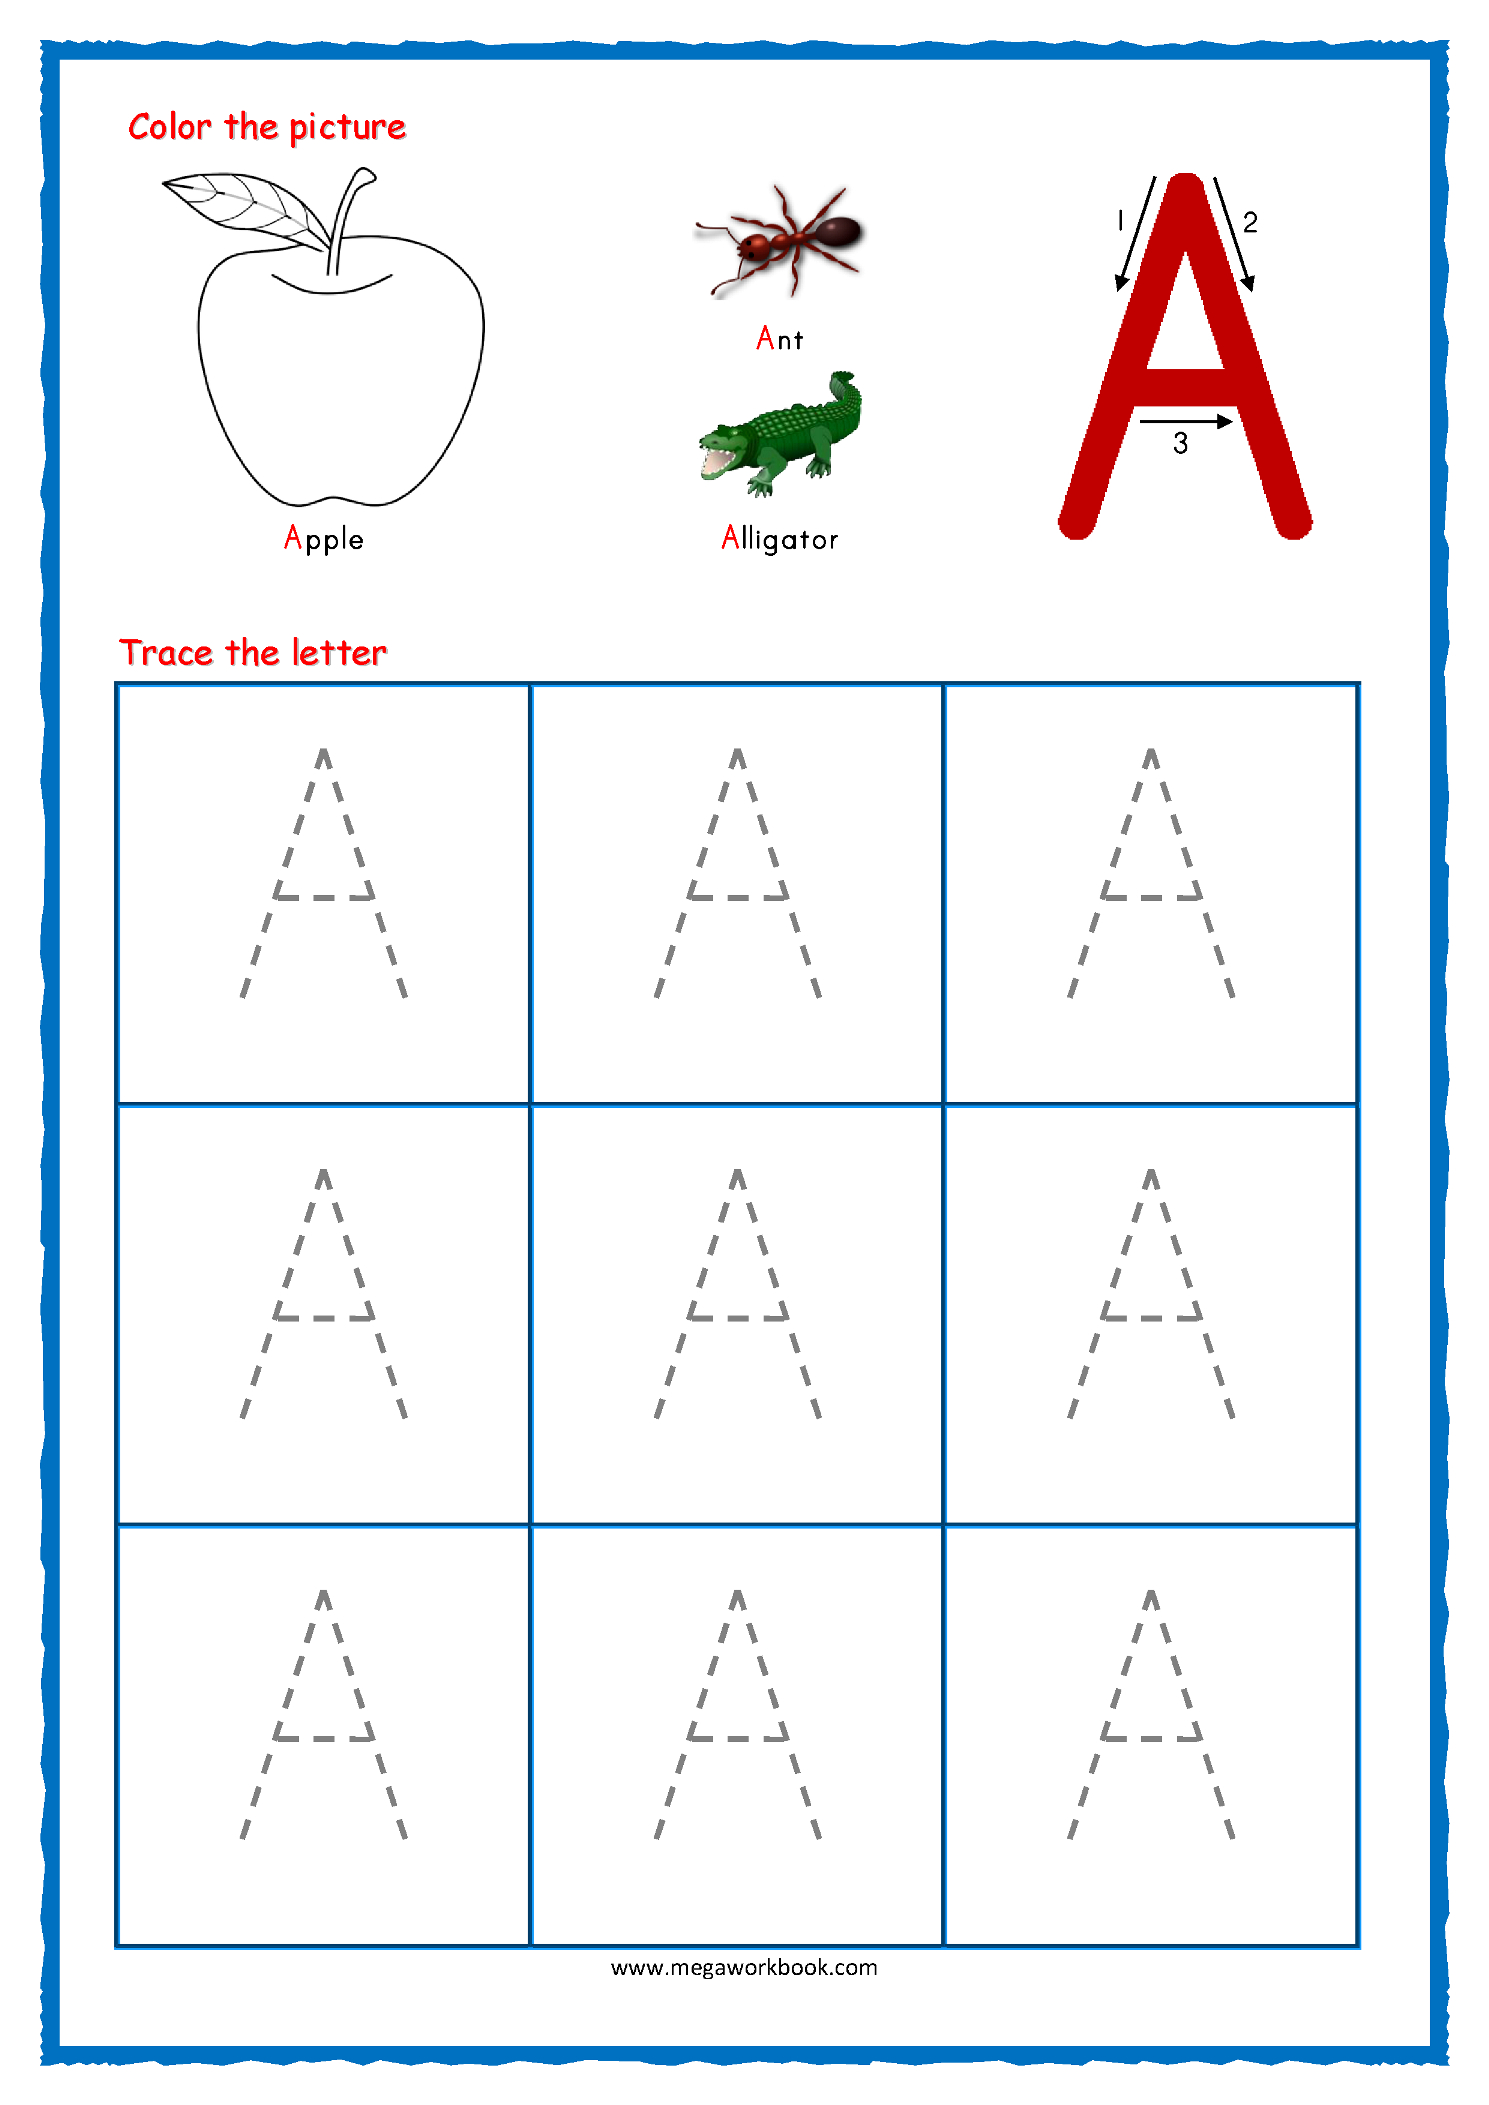 Tracing Letters - Alphabet Tracing - Capital Letters throughout Tracing Letters Worksheets For Preschool